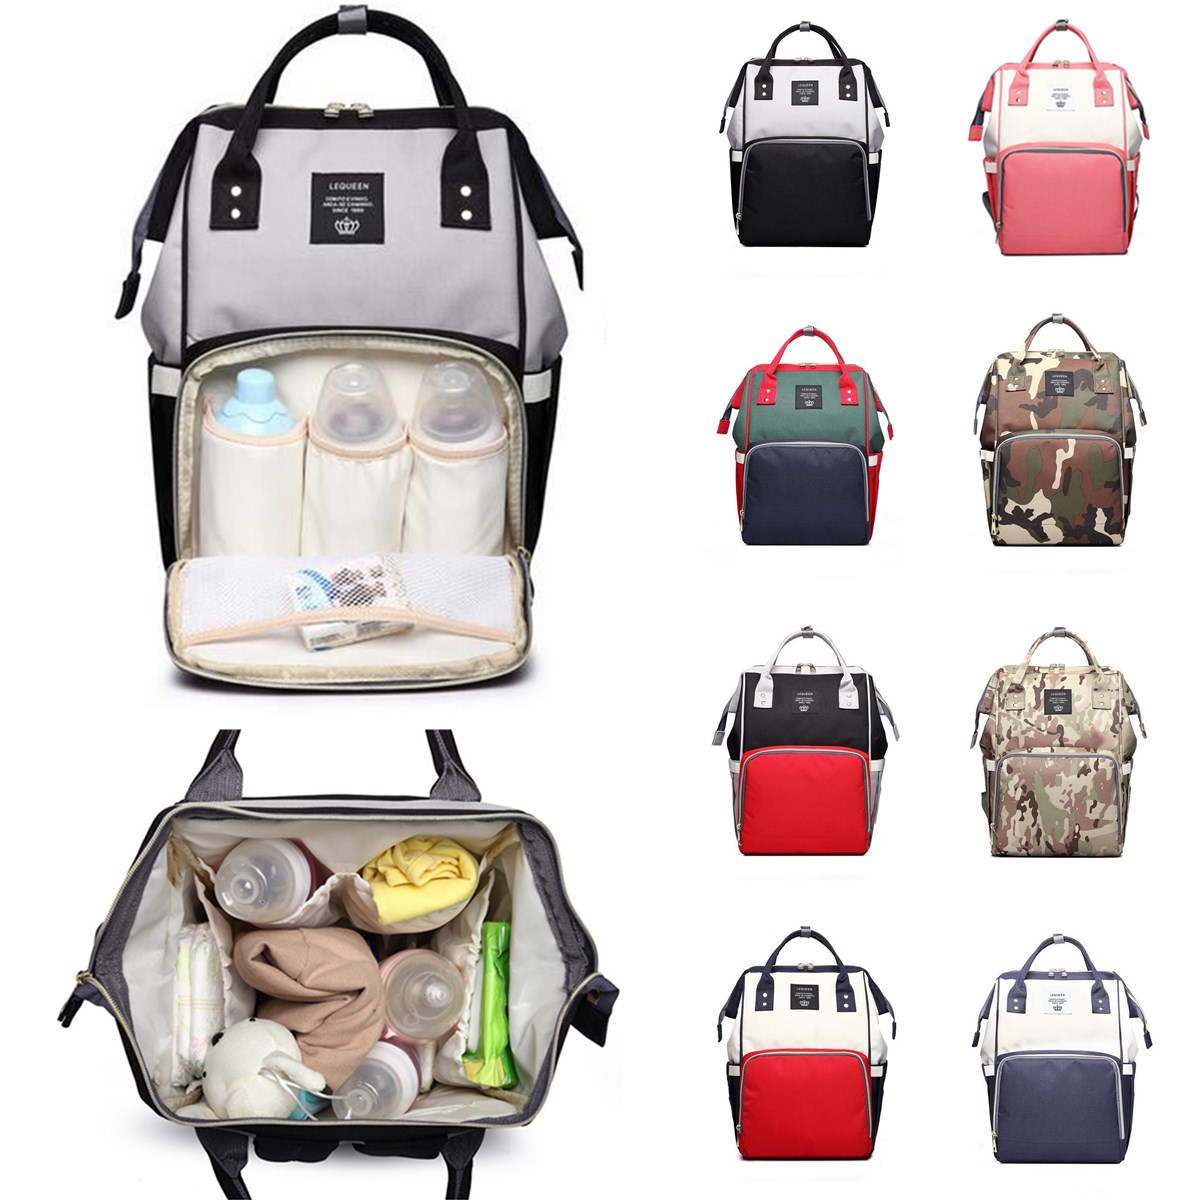 16L-Mummy-Backpack-Baby-Nappy-Diaper-Bag-Large-Capacity-Storage-Pouch-Outdoor-Travel-1471815-2